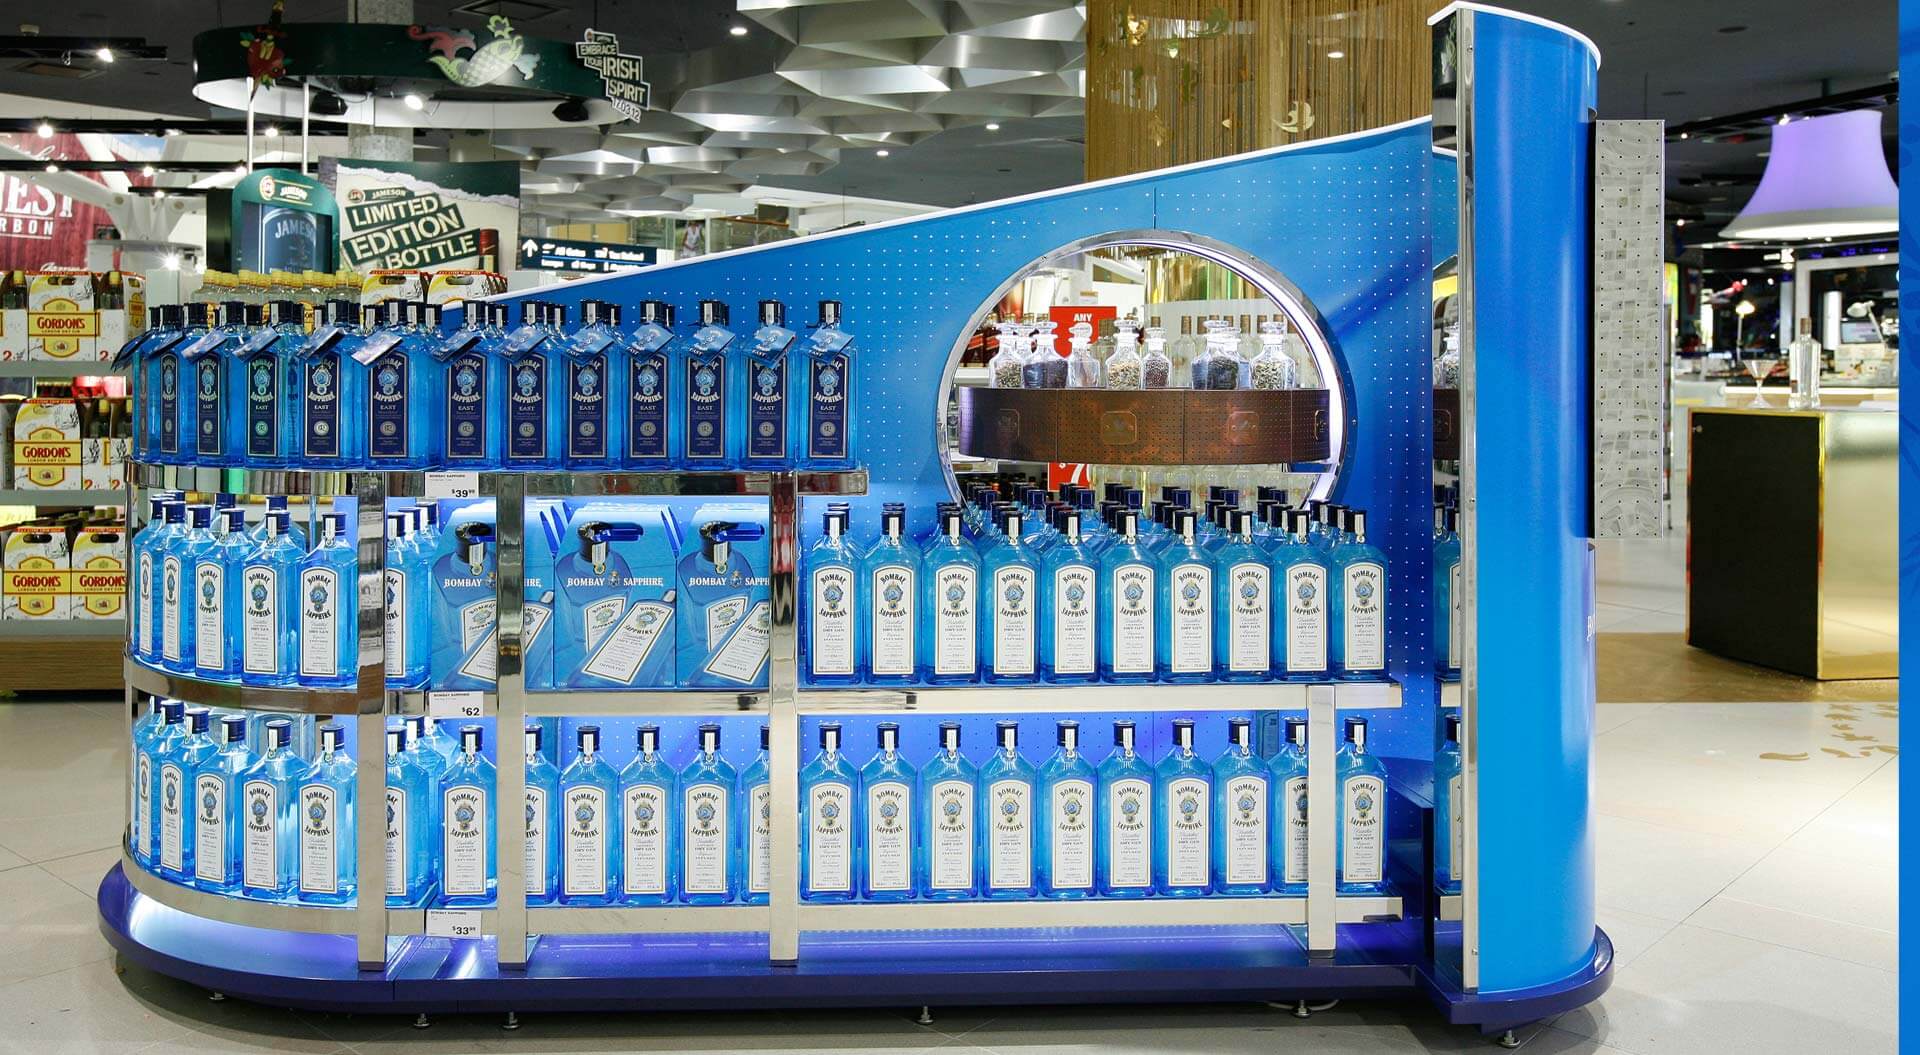 Bacardi Bombay Sapphire spirits industry promotion merchandising systems design at Sydney airport for duty free travel retail